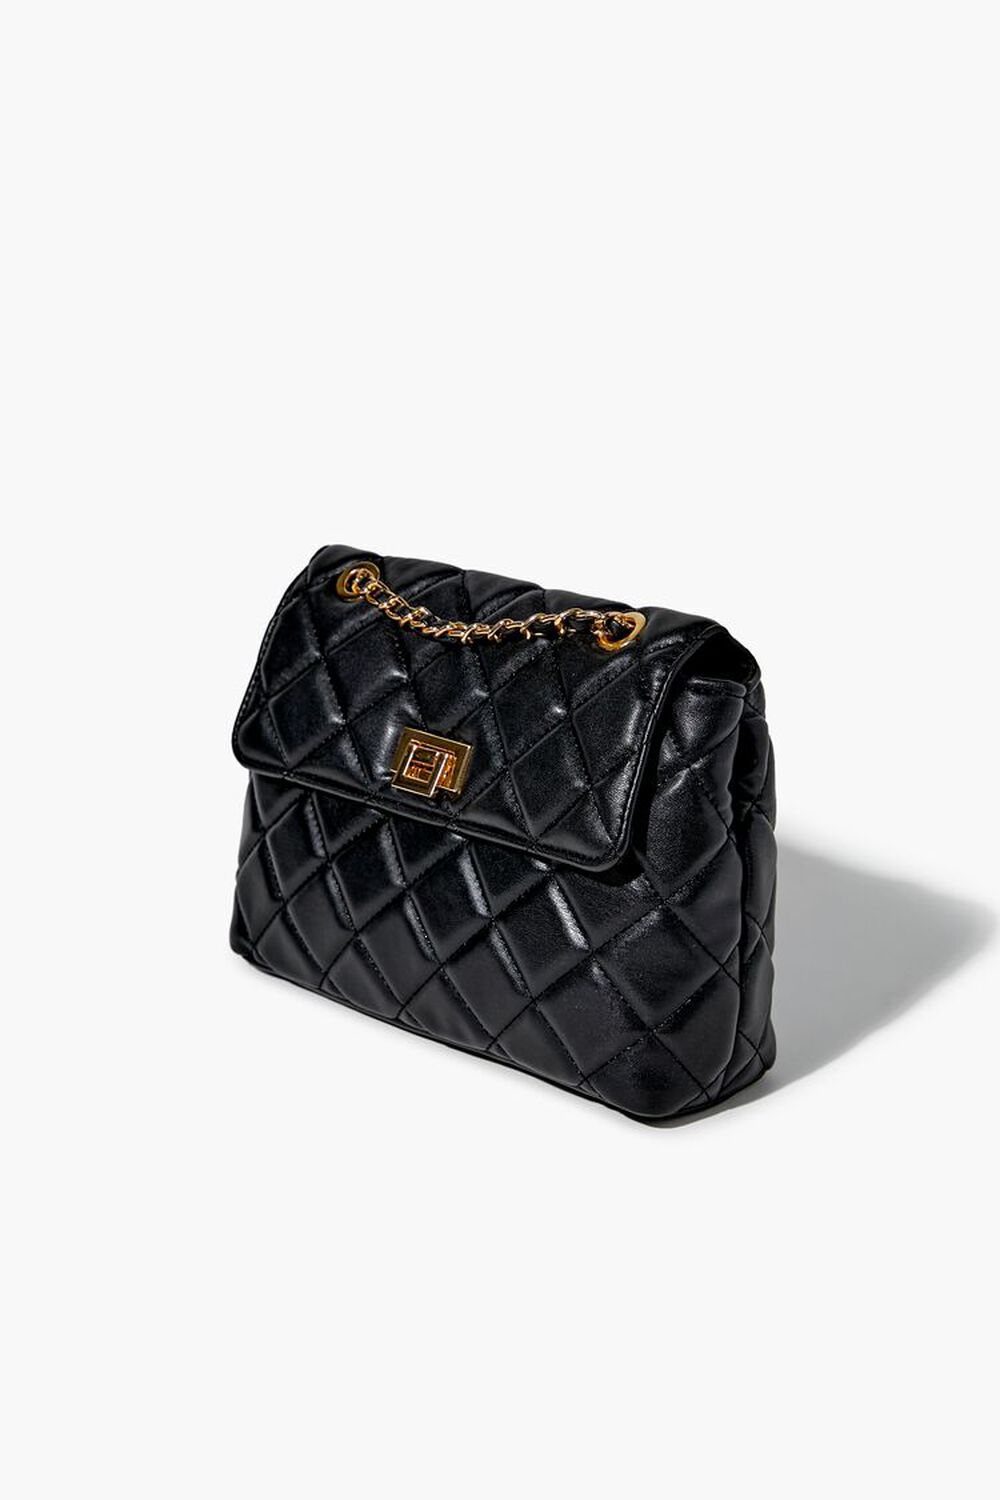 Quilted Faux Leather Handbag, image 2